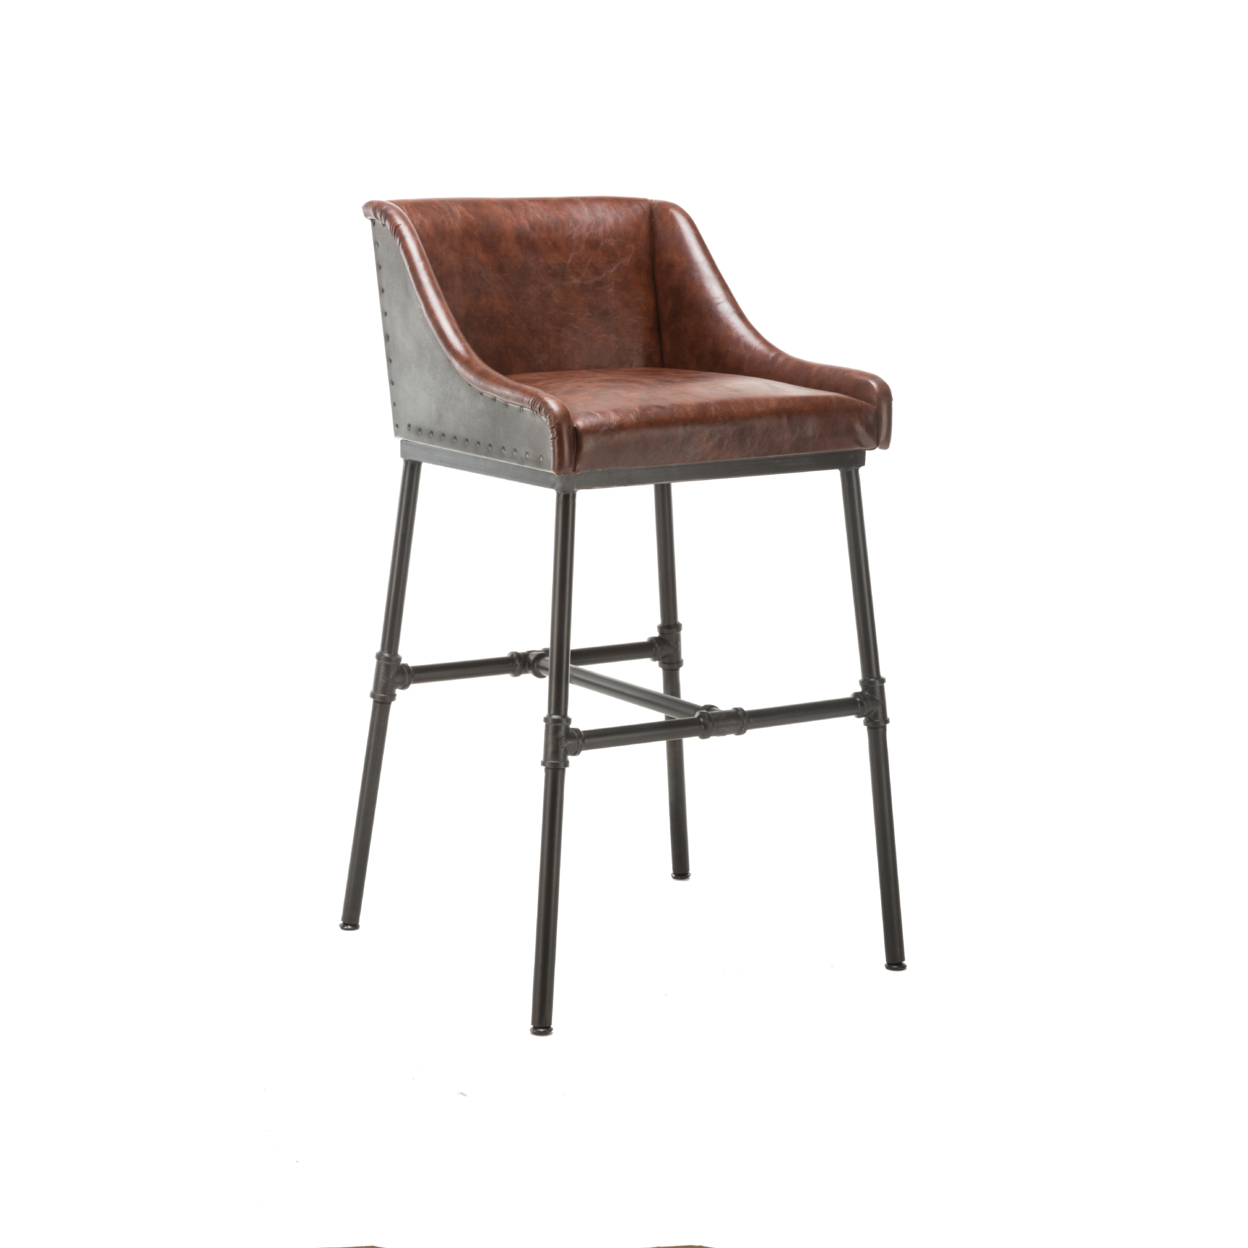 Leatherette Bar Stool With Riveted Metal Backing, Brown And Black- Saltoro Sherpi